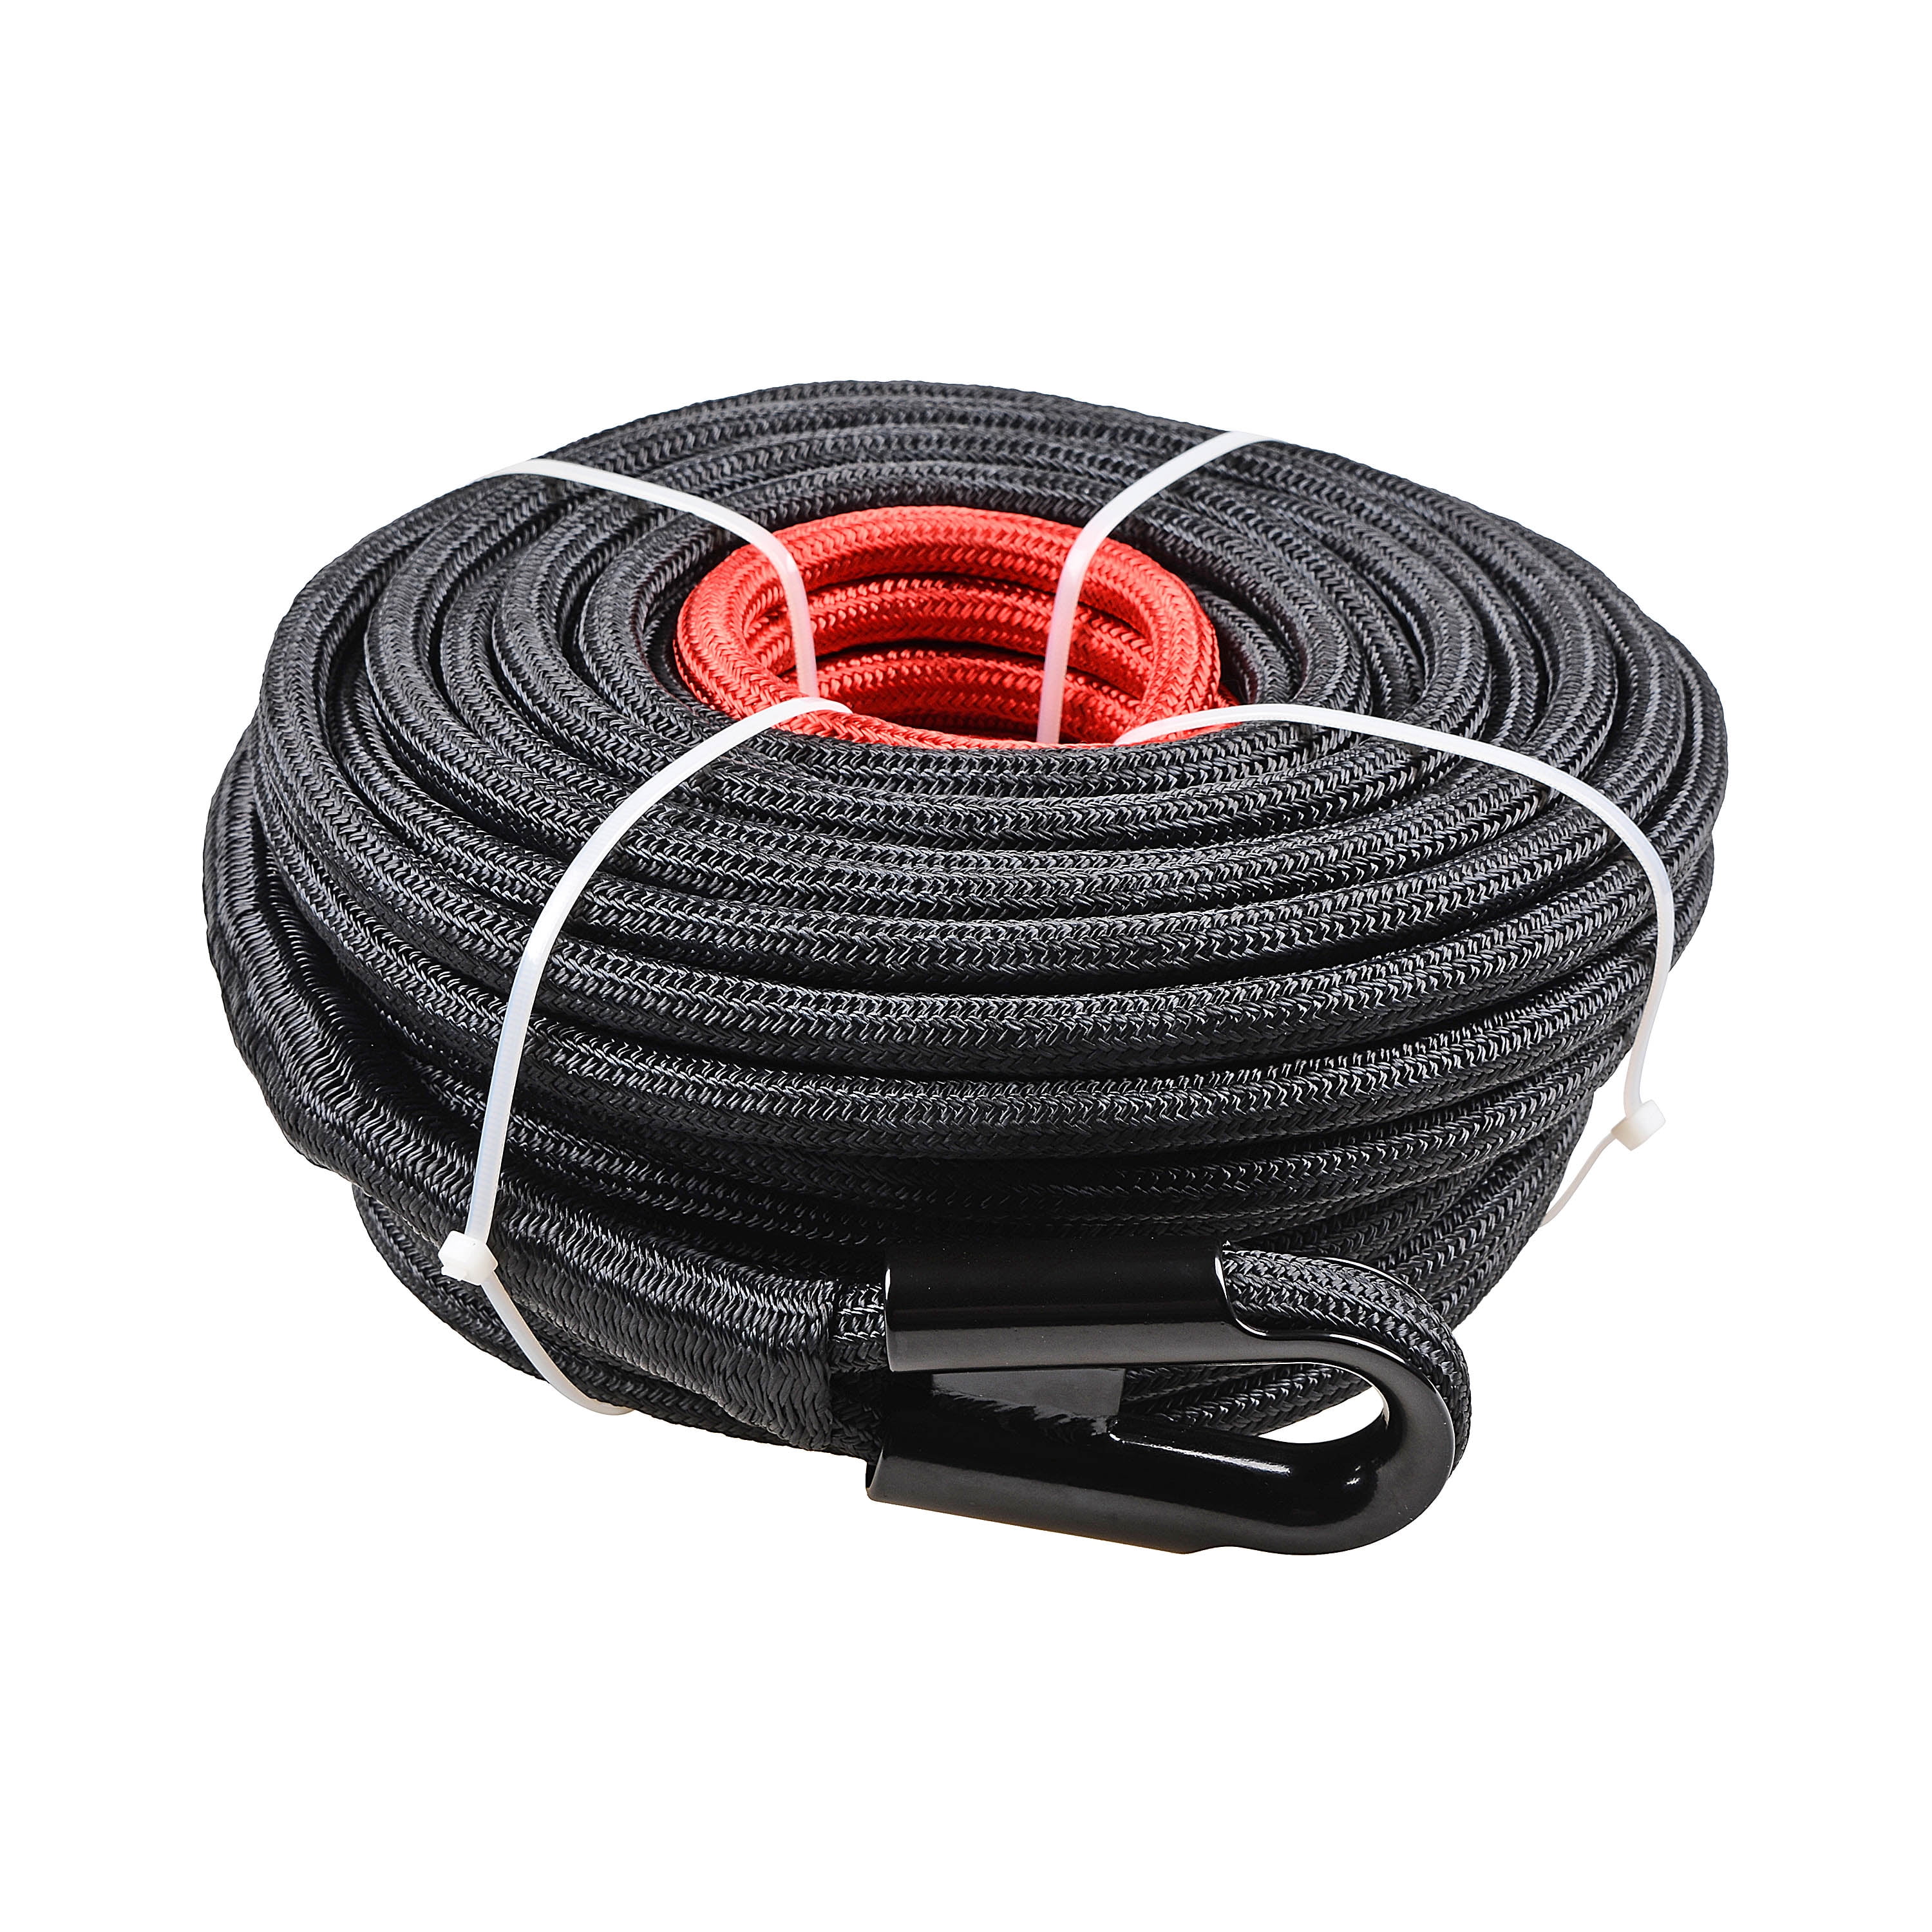 Synthetic Winch Rope 1/4 x 50 7500+Lbs Blue Winch Nylon Line with Black Protecting Sleeve Synthetic Nylon Winch Rope for ATV UTV SUV Jeep Truck Boat